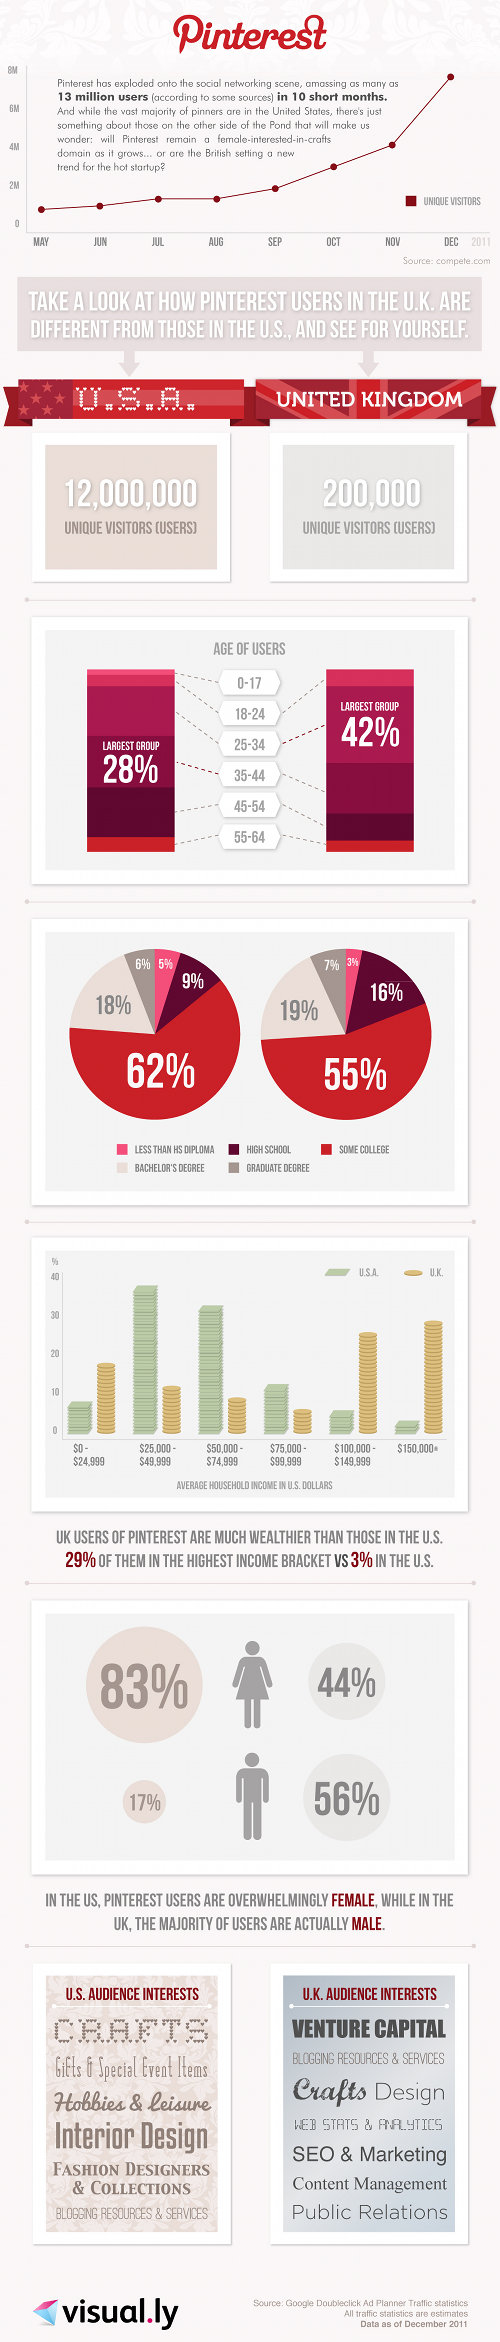 Pinterest: How do US and UK users compare?